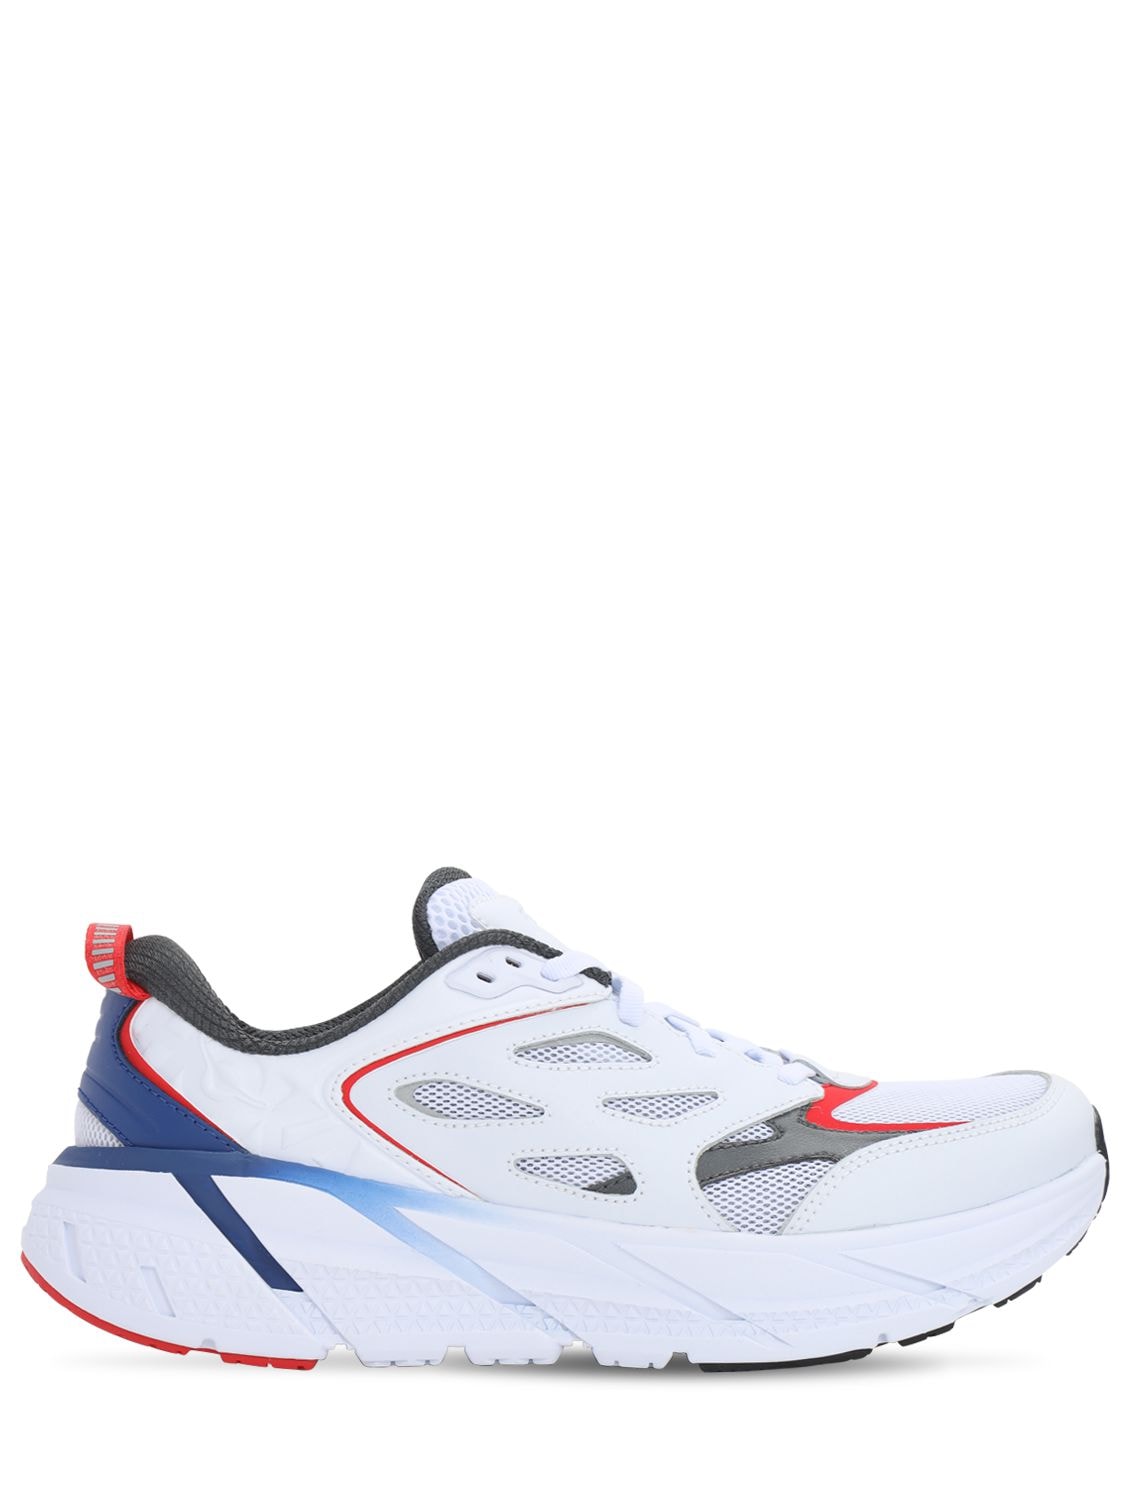 HOKA ONE ONE OPENING CEREMONY CLIFTON RUNNING SNEAKER,71IDN7004-V1RSQG2